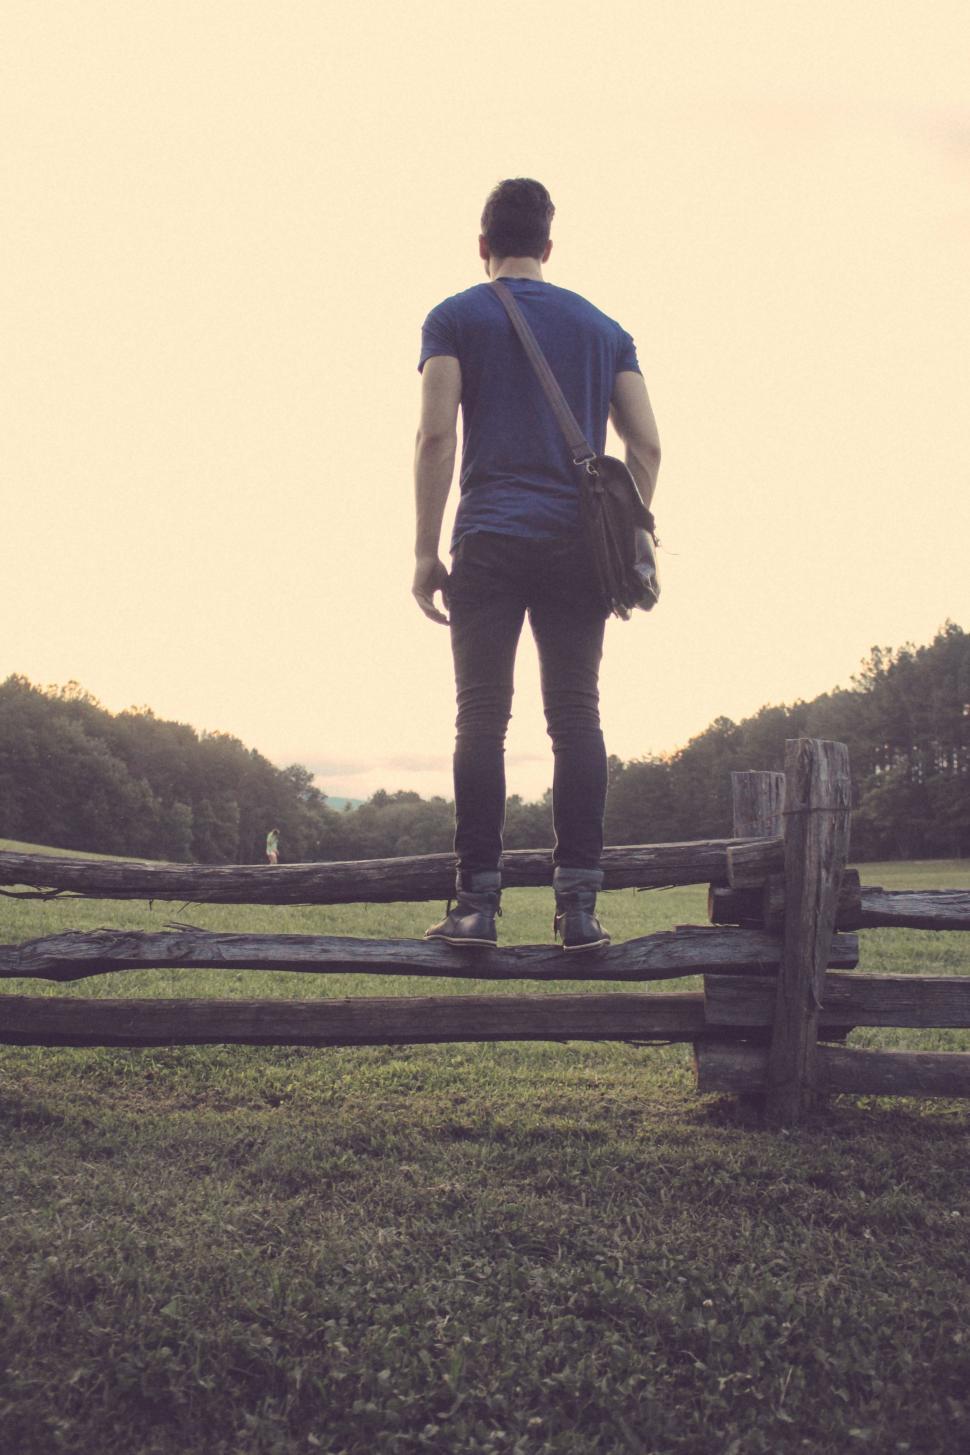 Free Image of Man Standing on Top of Wooden Fence 